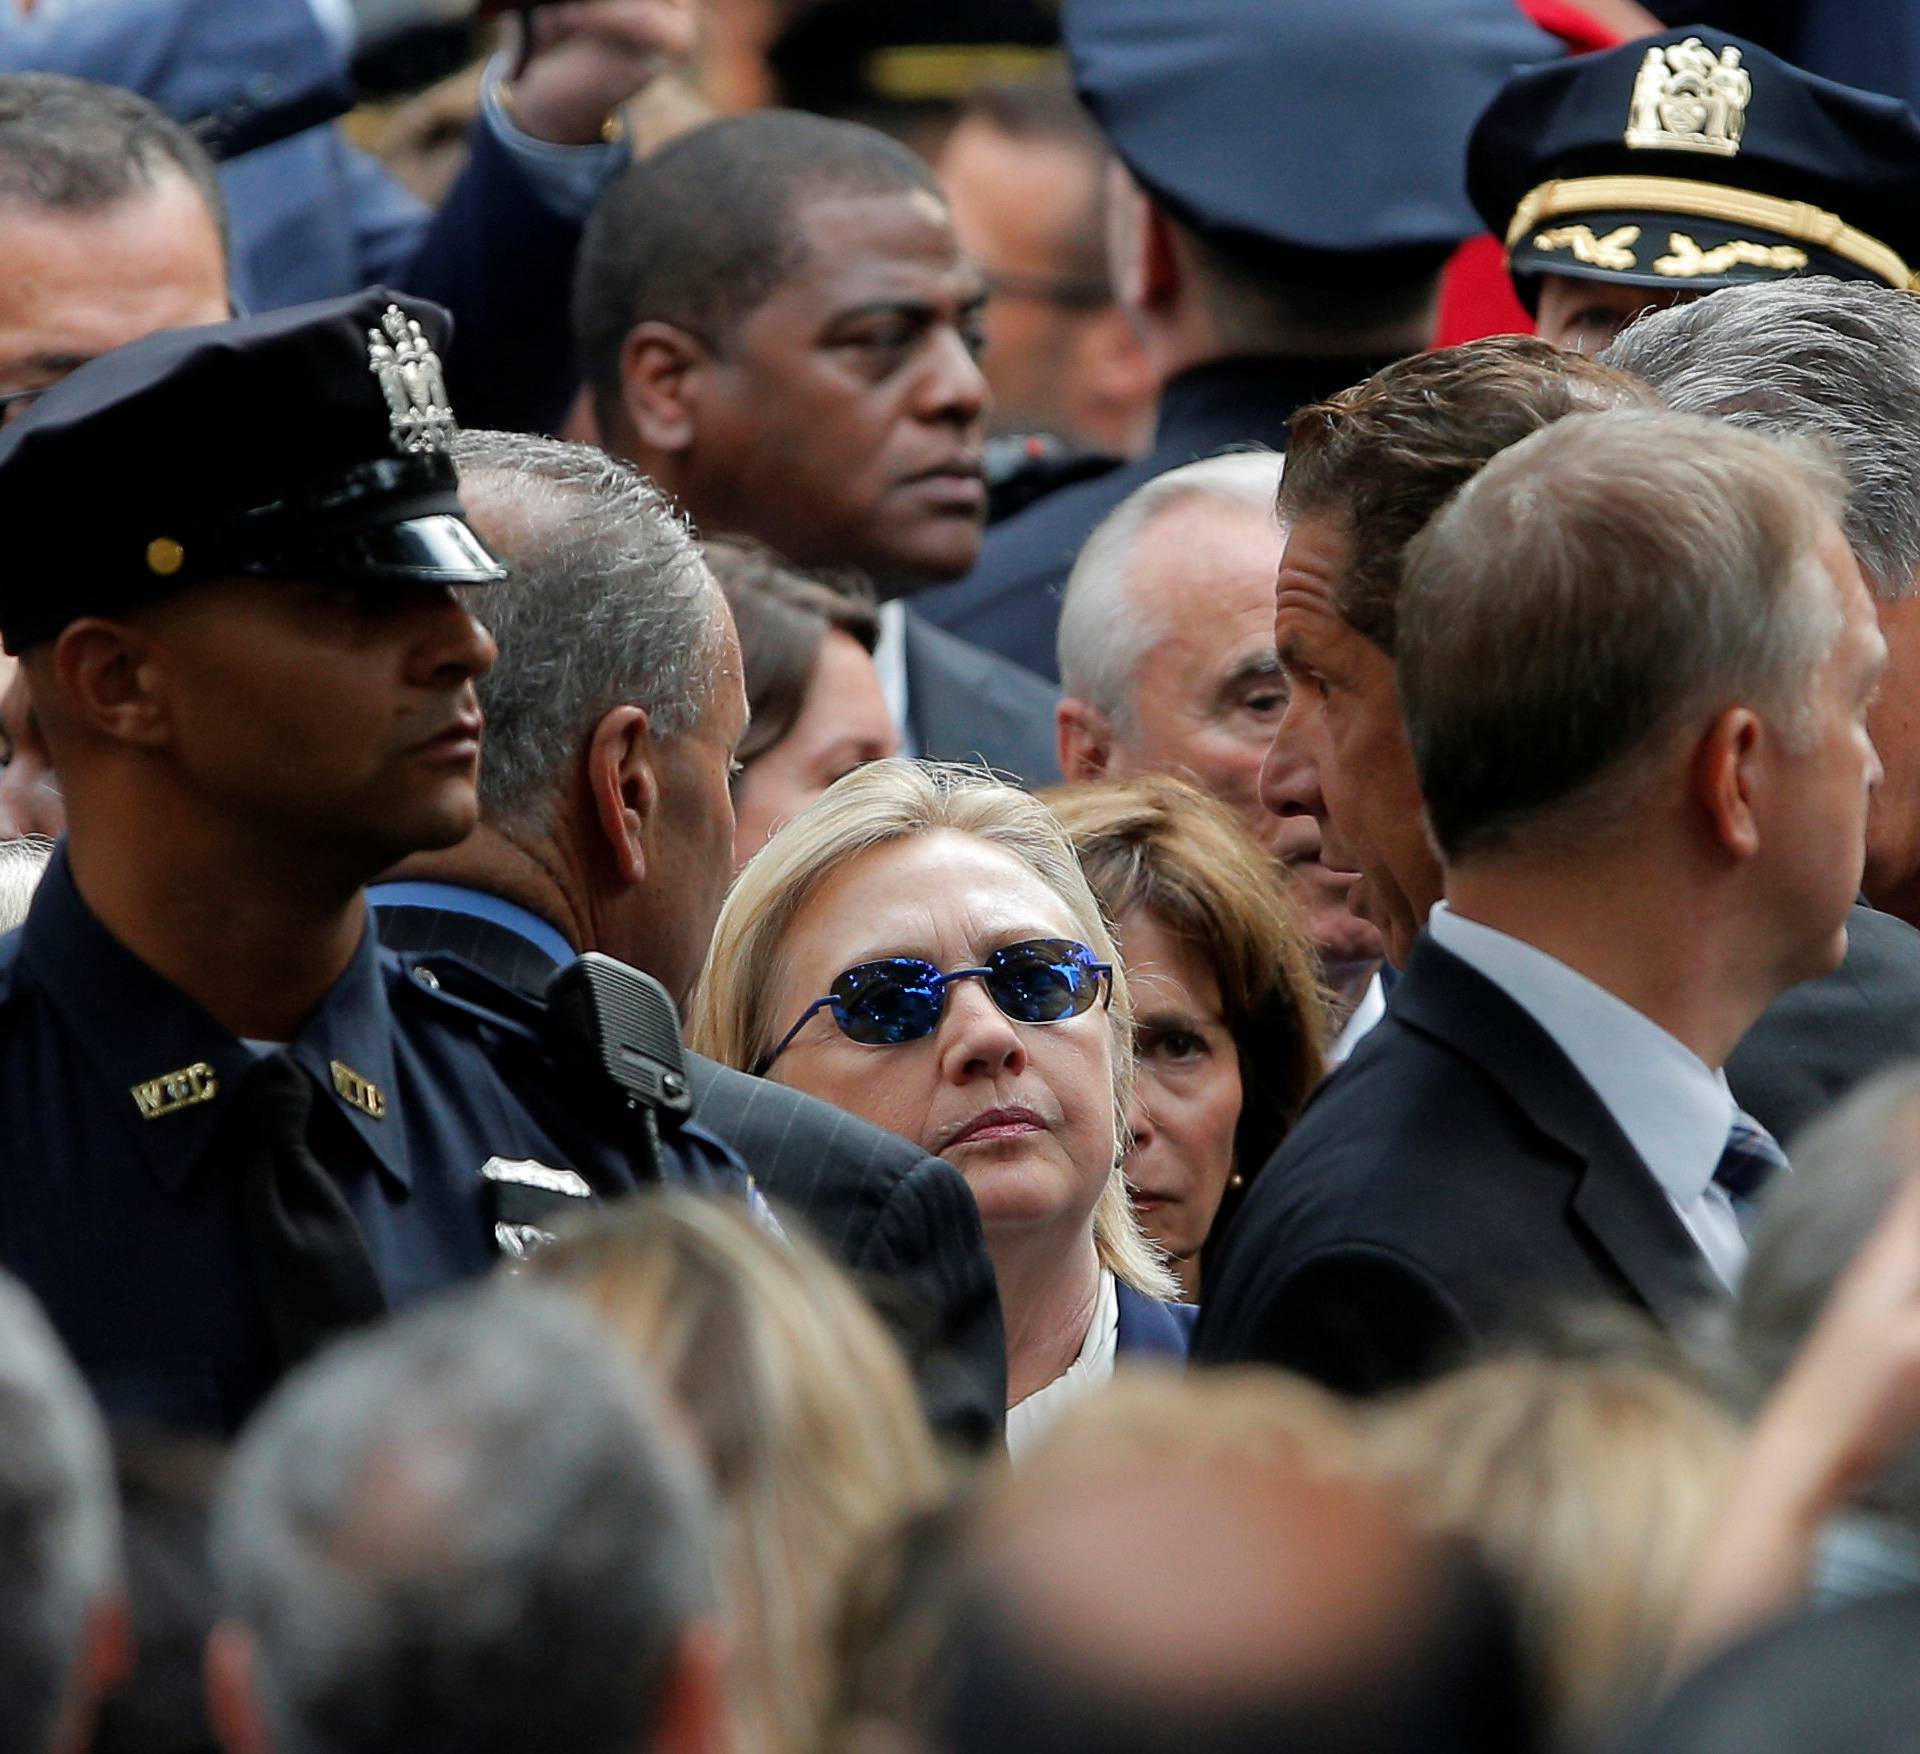 U.S. Democratic presidential candidate Hillary Clinton attends ceremonies to mark the 15th anniversary of the September 11 attacks at the National 9/11 Memorial in New York